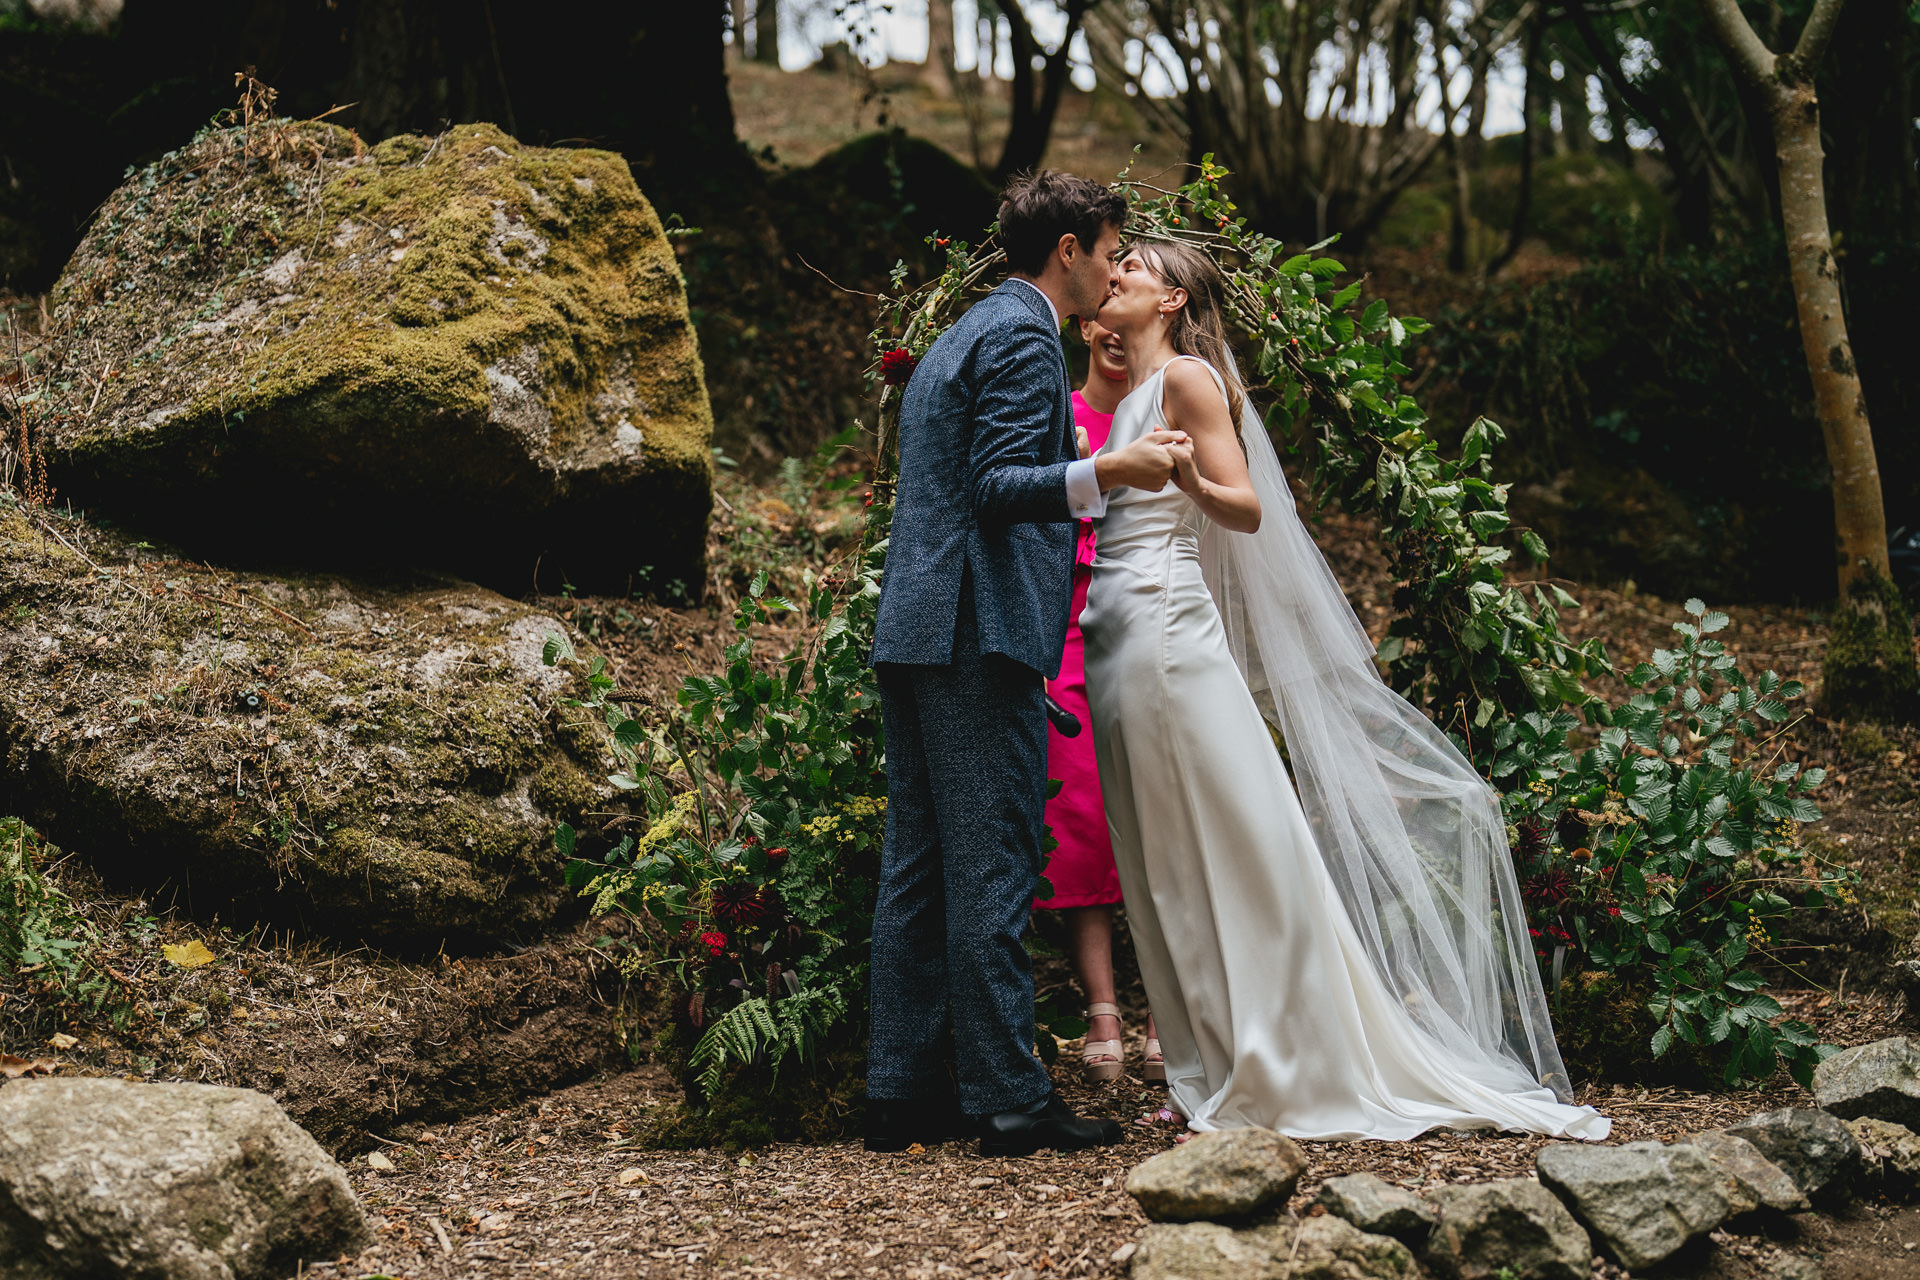 Bride and groom having a first kiss at an outdoor wedding ceremony in Dartmoor woodland